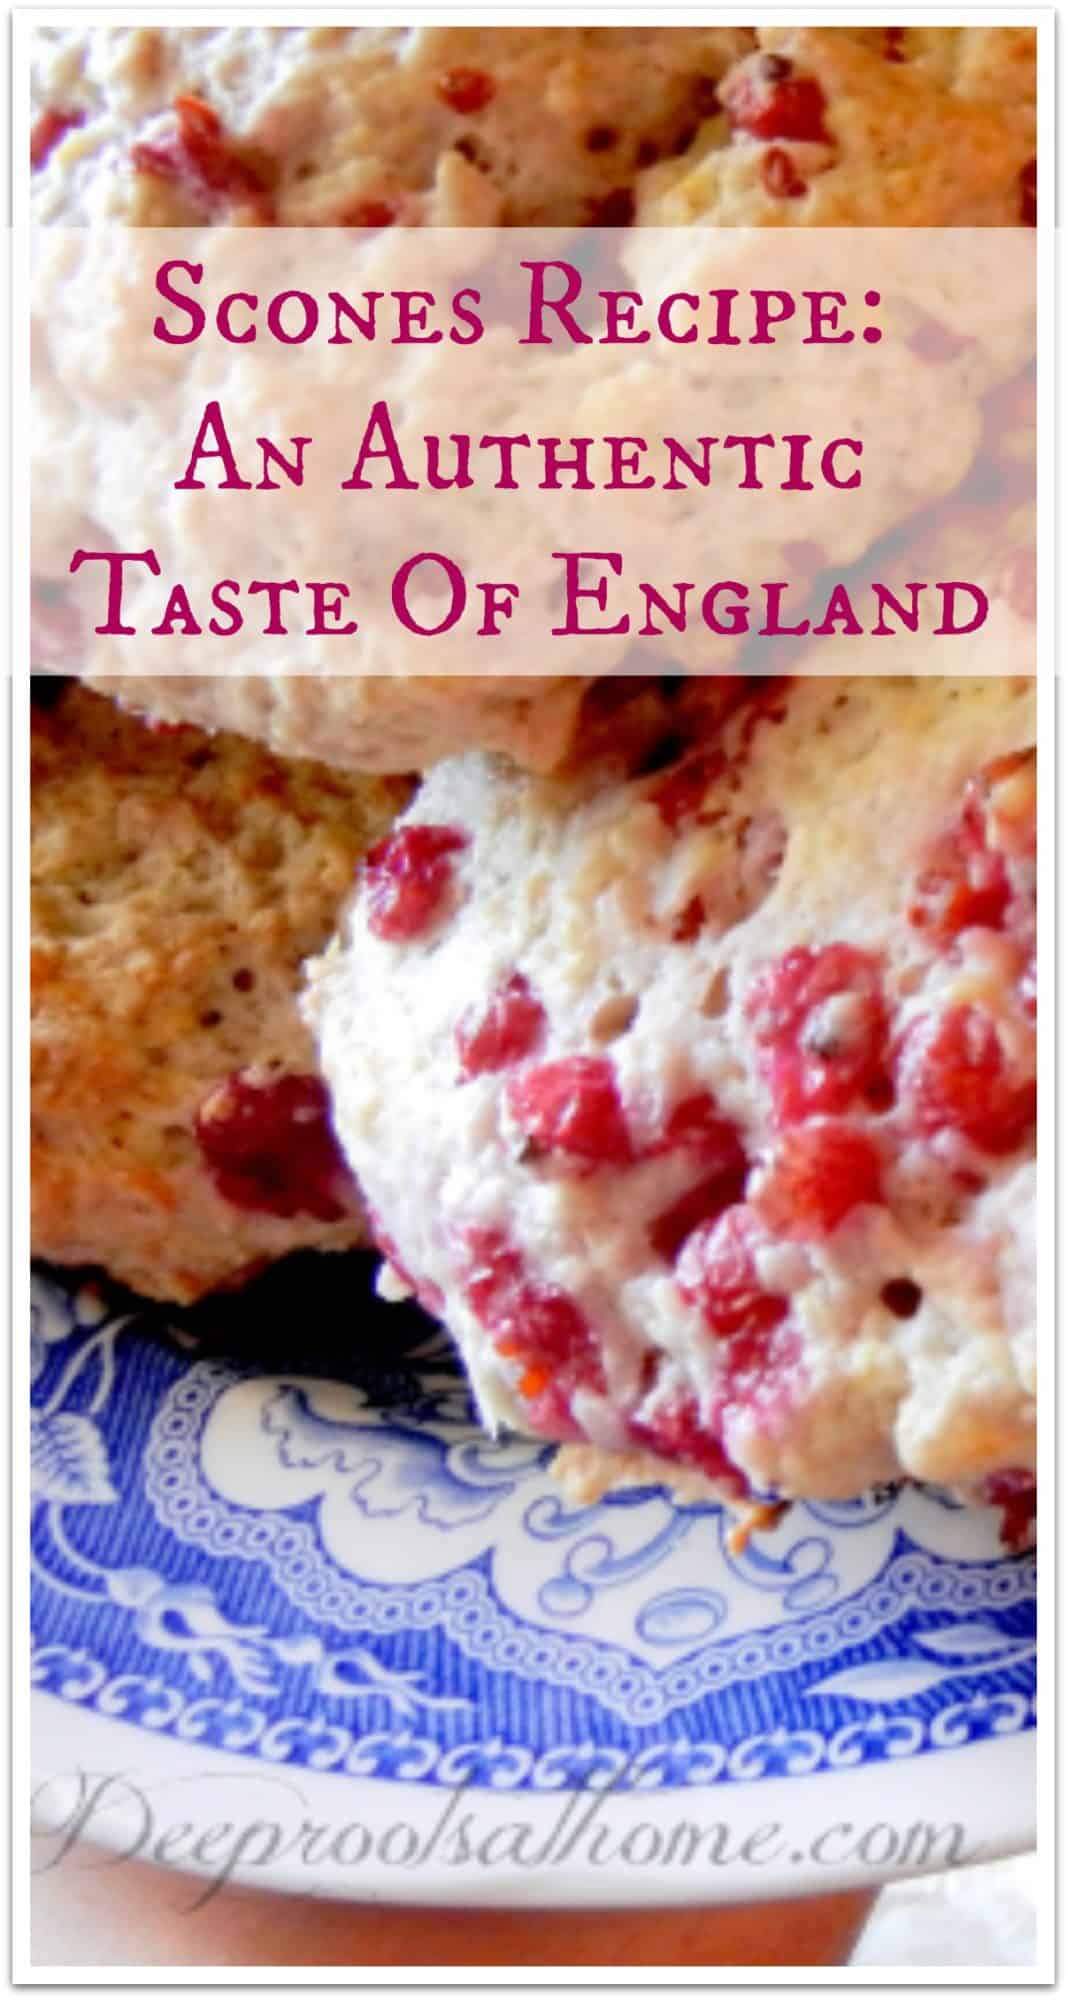 Currant Scones Recipe: Authentic Taste Of Merry Old England, currant scones, plate of sweets, sweet treats, fresh baked, hot out of the oven, dessert scones, high tea, English tea, cozy home, Breezy Brookshire, Reading to the Children, plates of warm scone, graduation party, raisins, berries, fruit scones, warm out of the oven, 